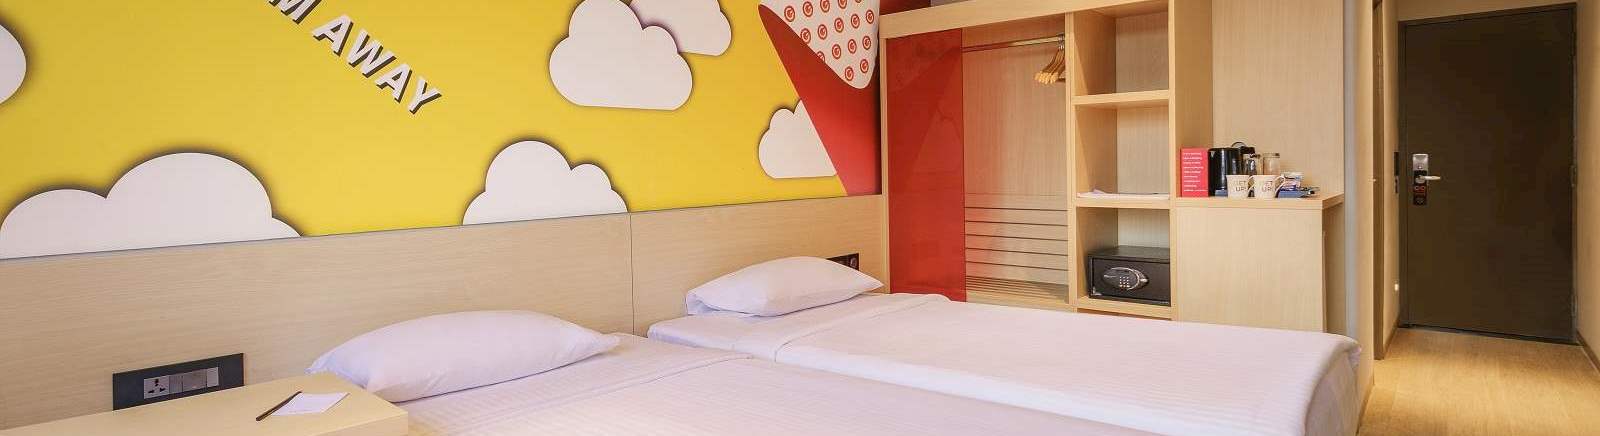 Manage Booking of Ginger Hotel